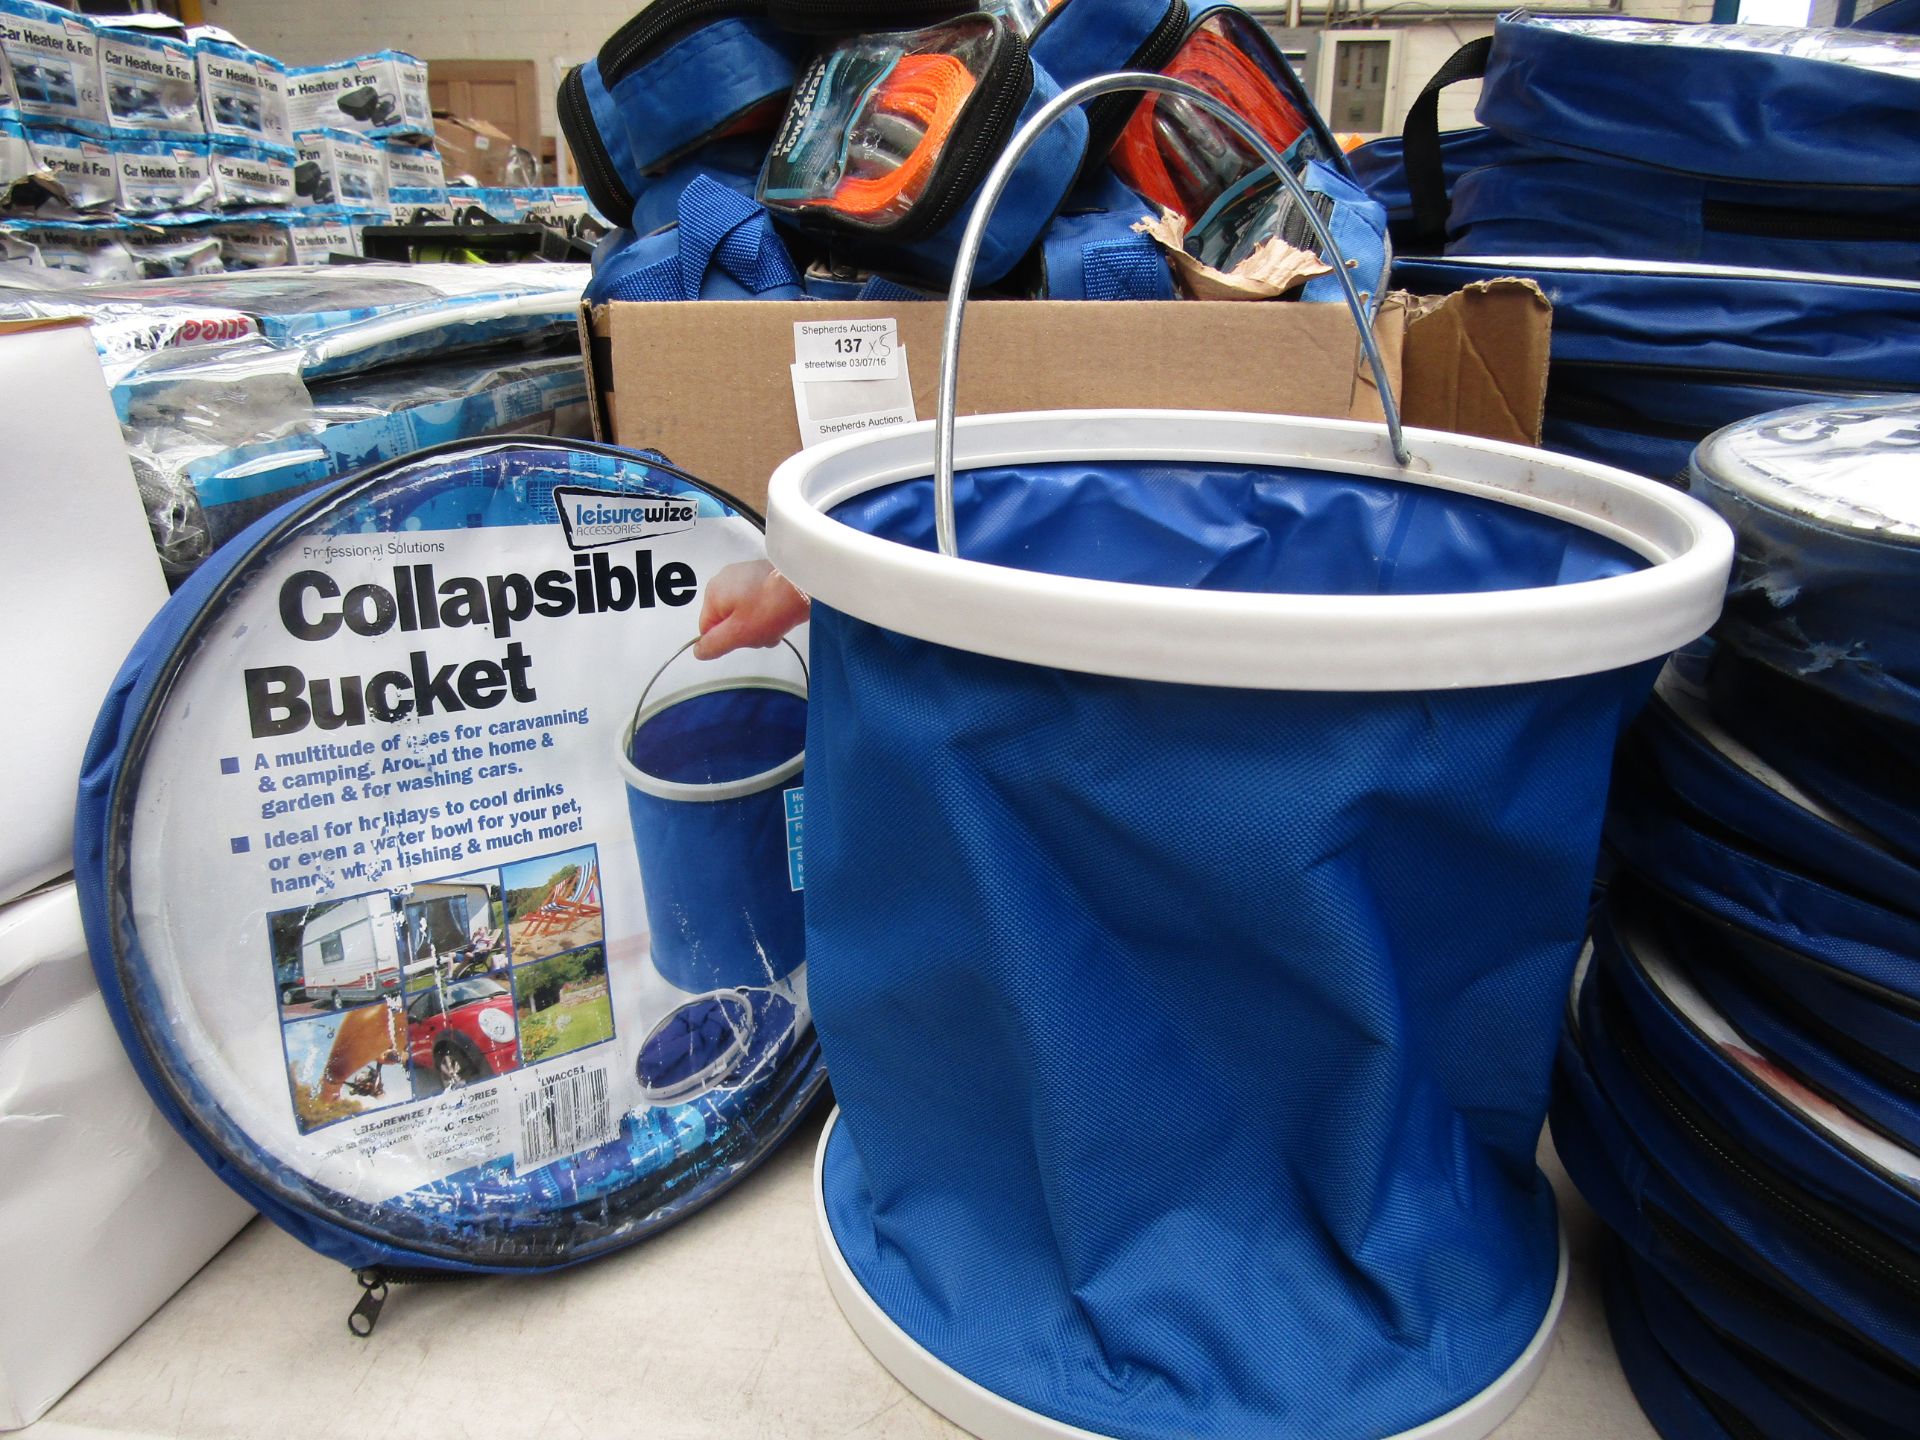 3x Streetwise Collapsible buckets in carry bags, new